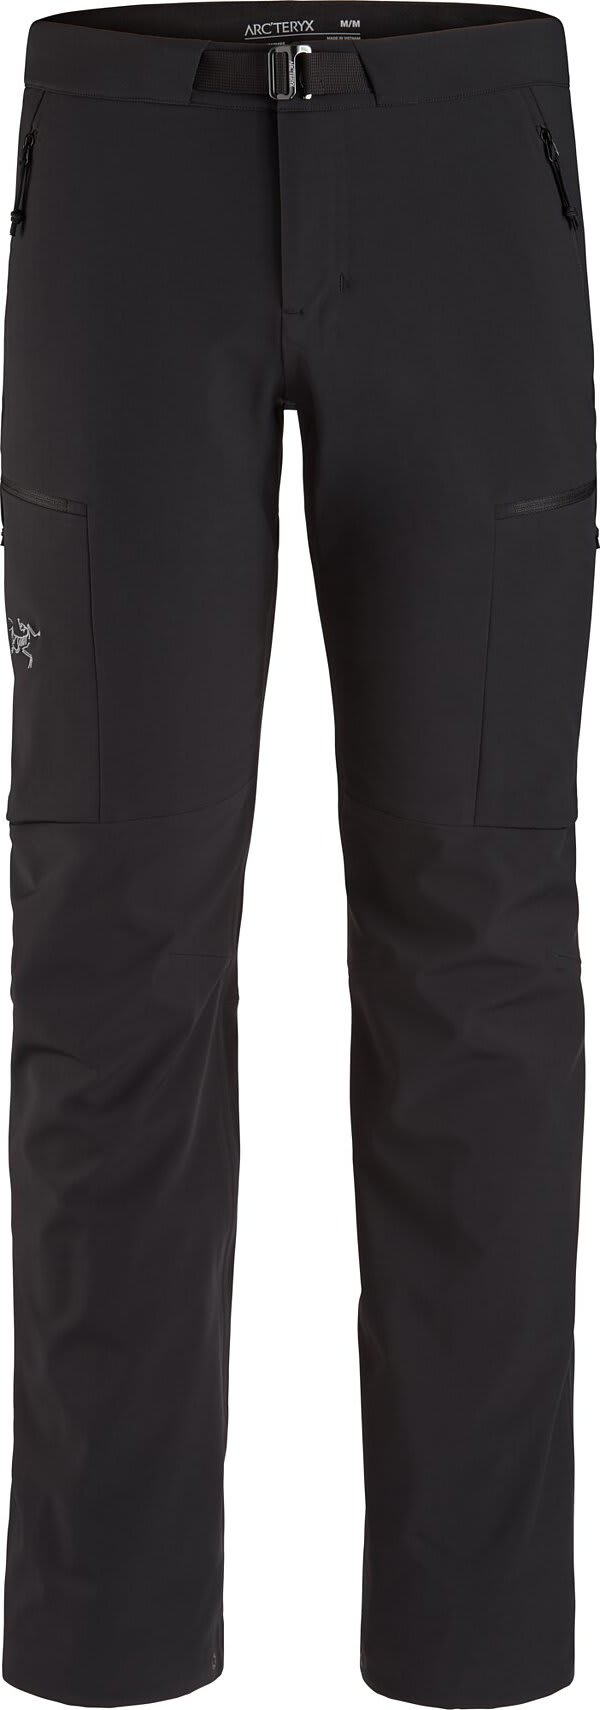 Buy Arc'teryx Men's Gamma MX Pant from Outnorth